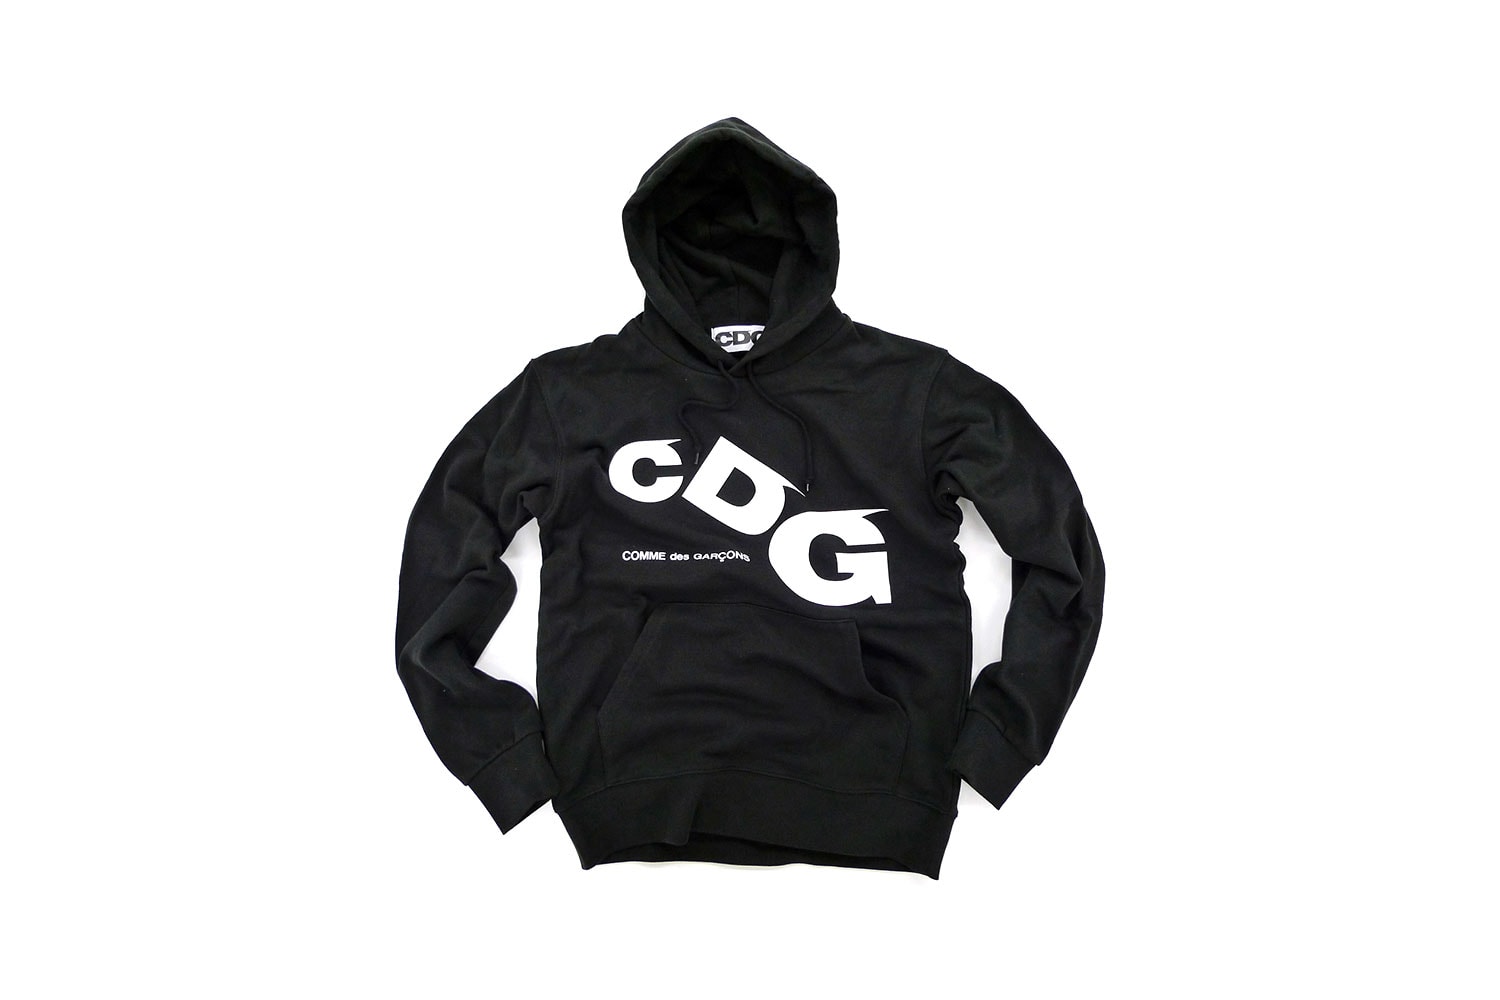 comme des garcons cdg pop-up store nagoya japan limited edition hoodies t-shirts address location 